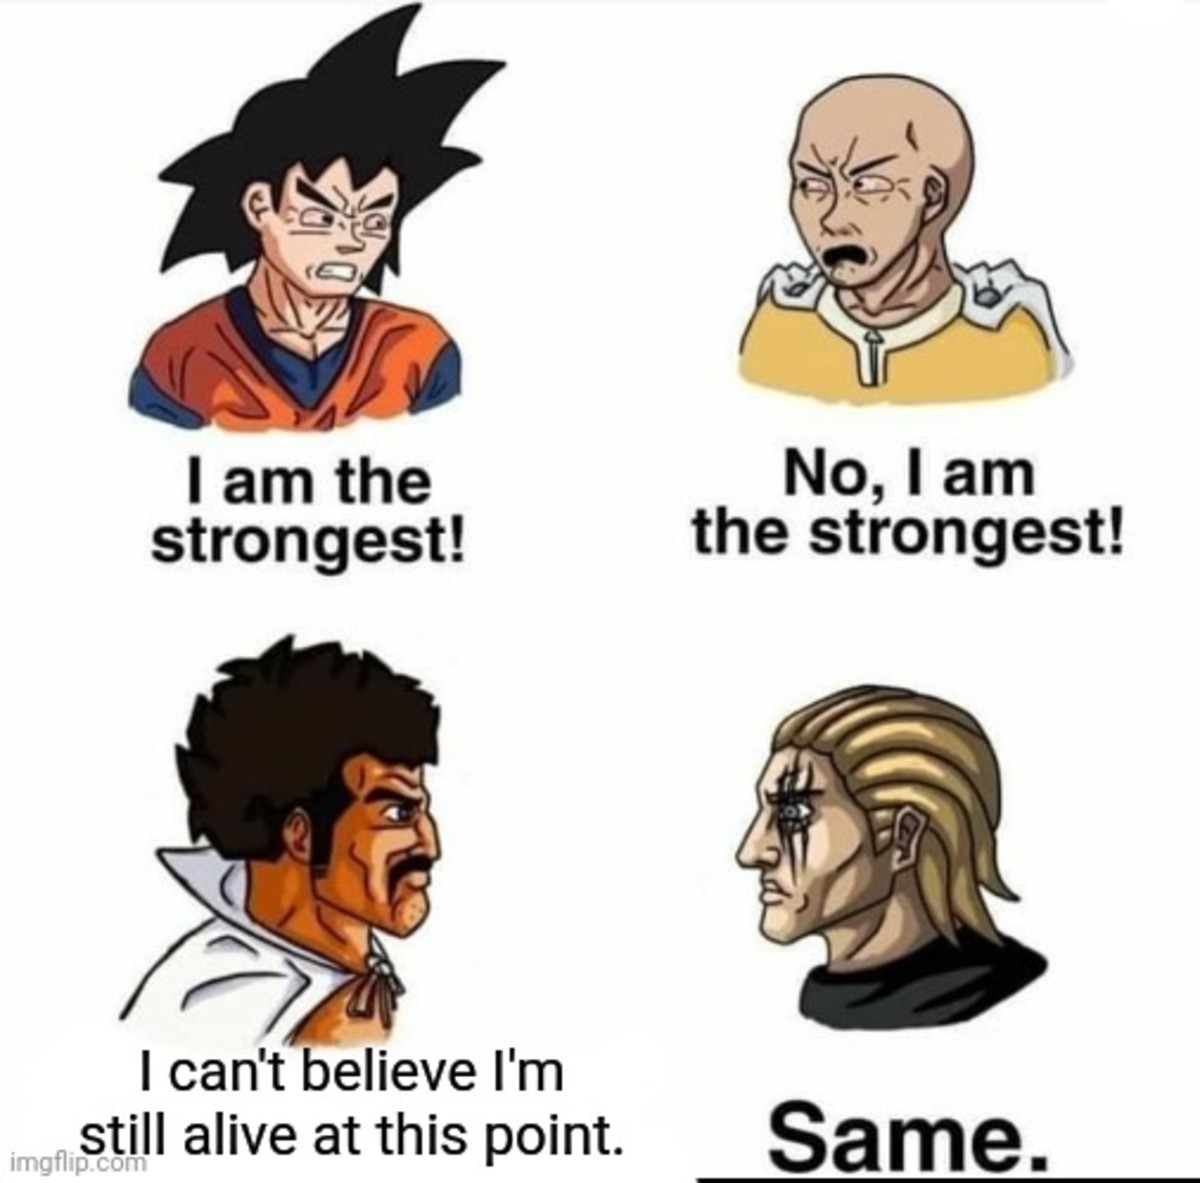 irresolute s. .. I think both Saitama and Goku would be delighted to get their ass beat by one another